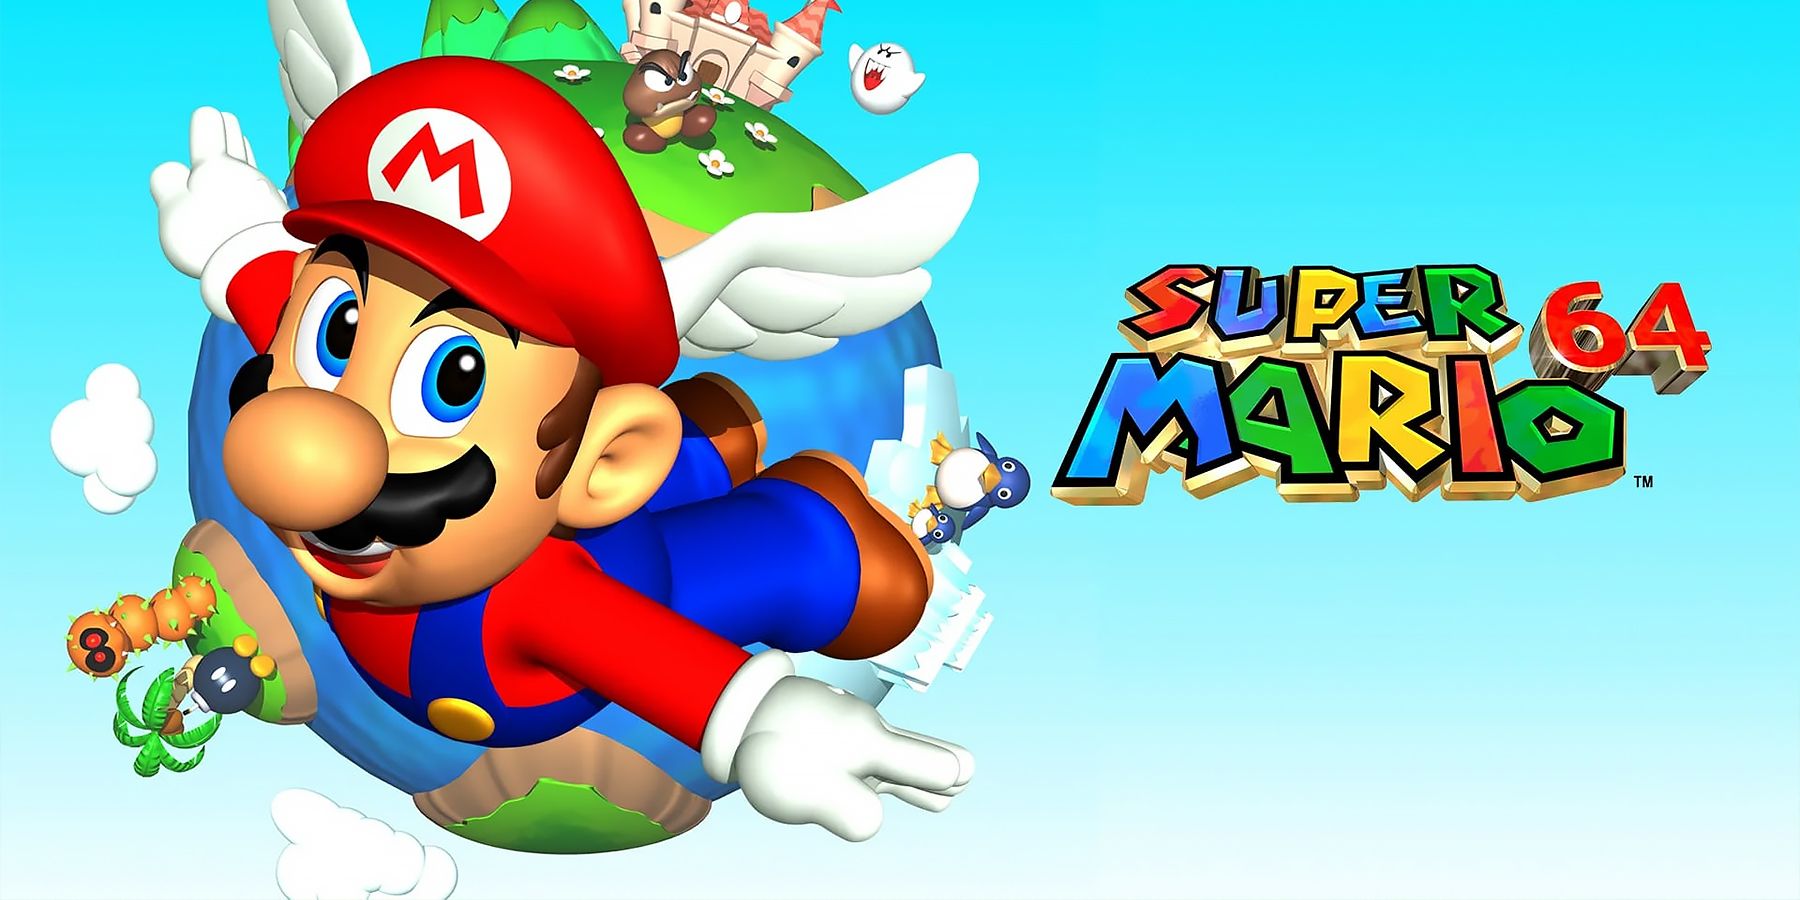 Super Mario 64 cover art with Mario in front of planet